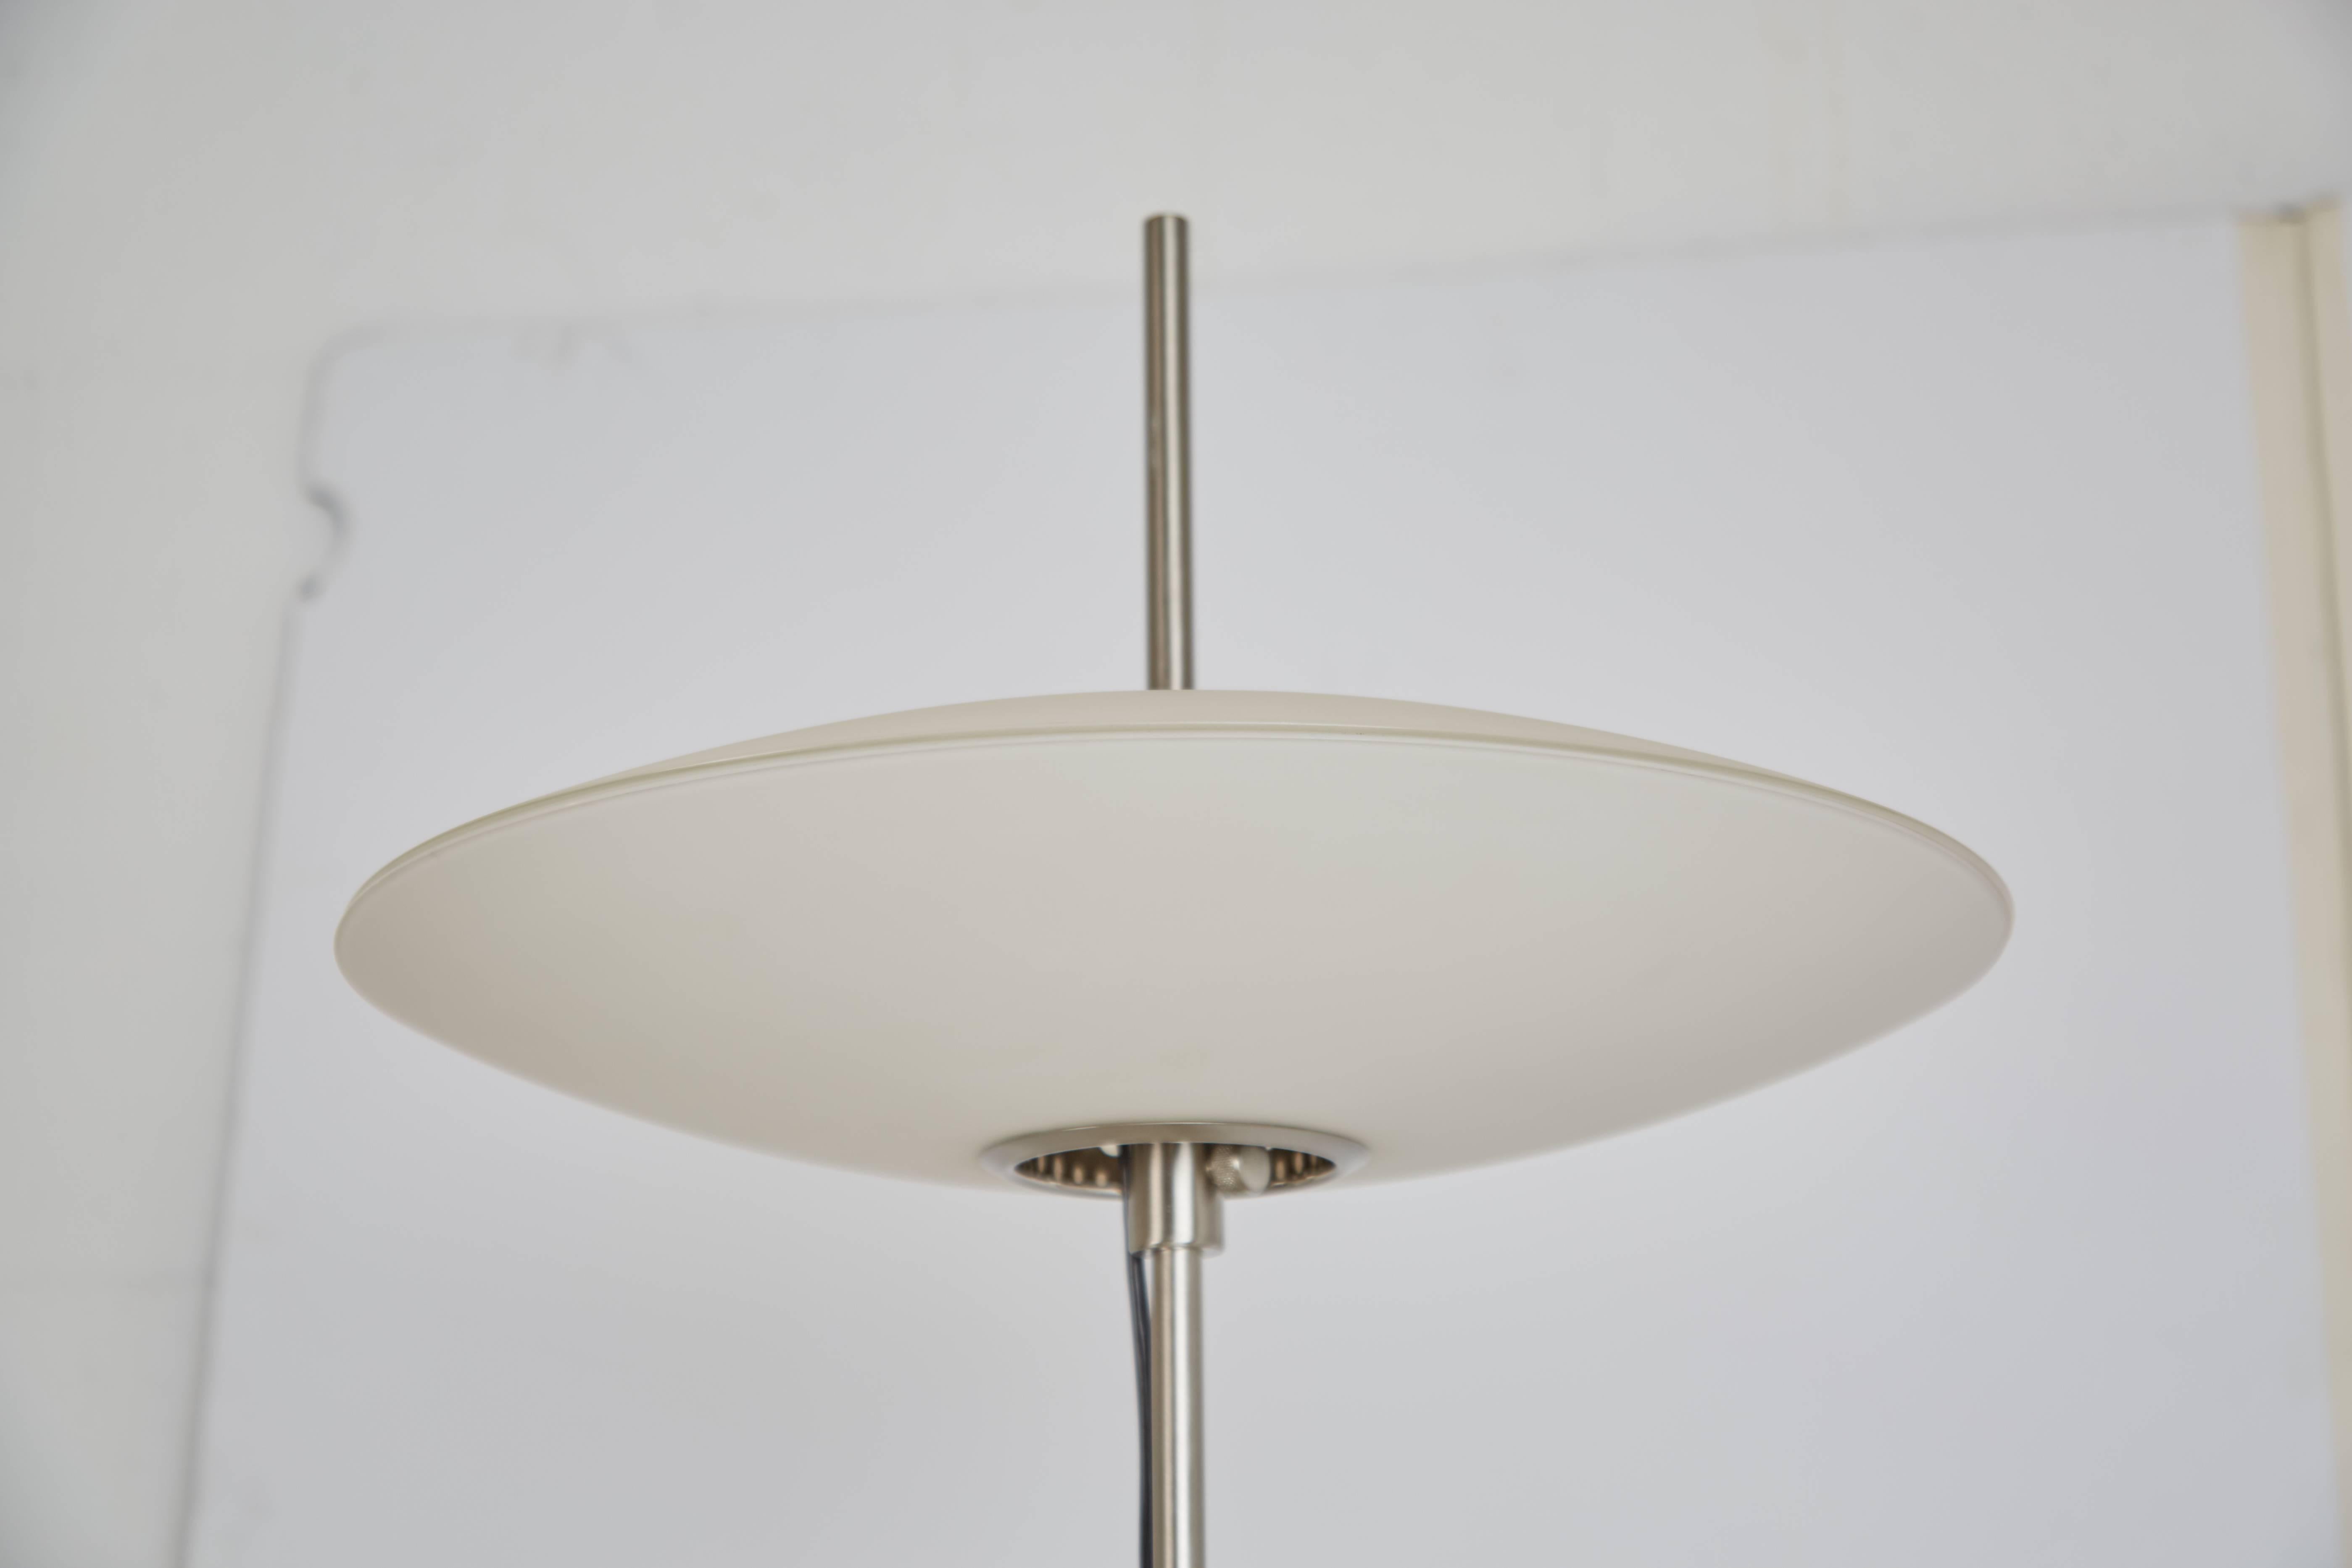 Looking to add a little pop of Googie style to your interior? This streamlined standing lamp will do just the trick. Comprised of an aluminum stand, concaved four prong base and topped with a frosted glass flying saucer shade. 

This adaptable